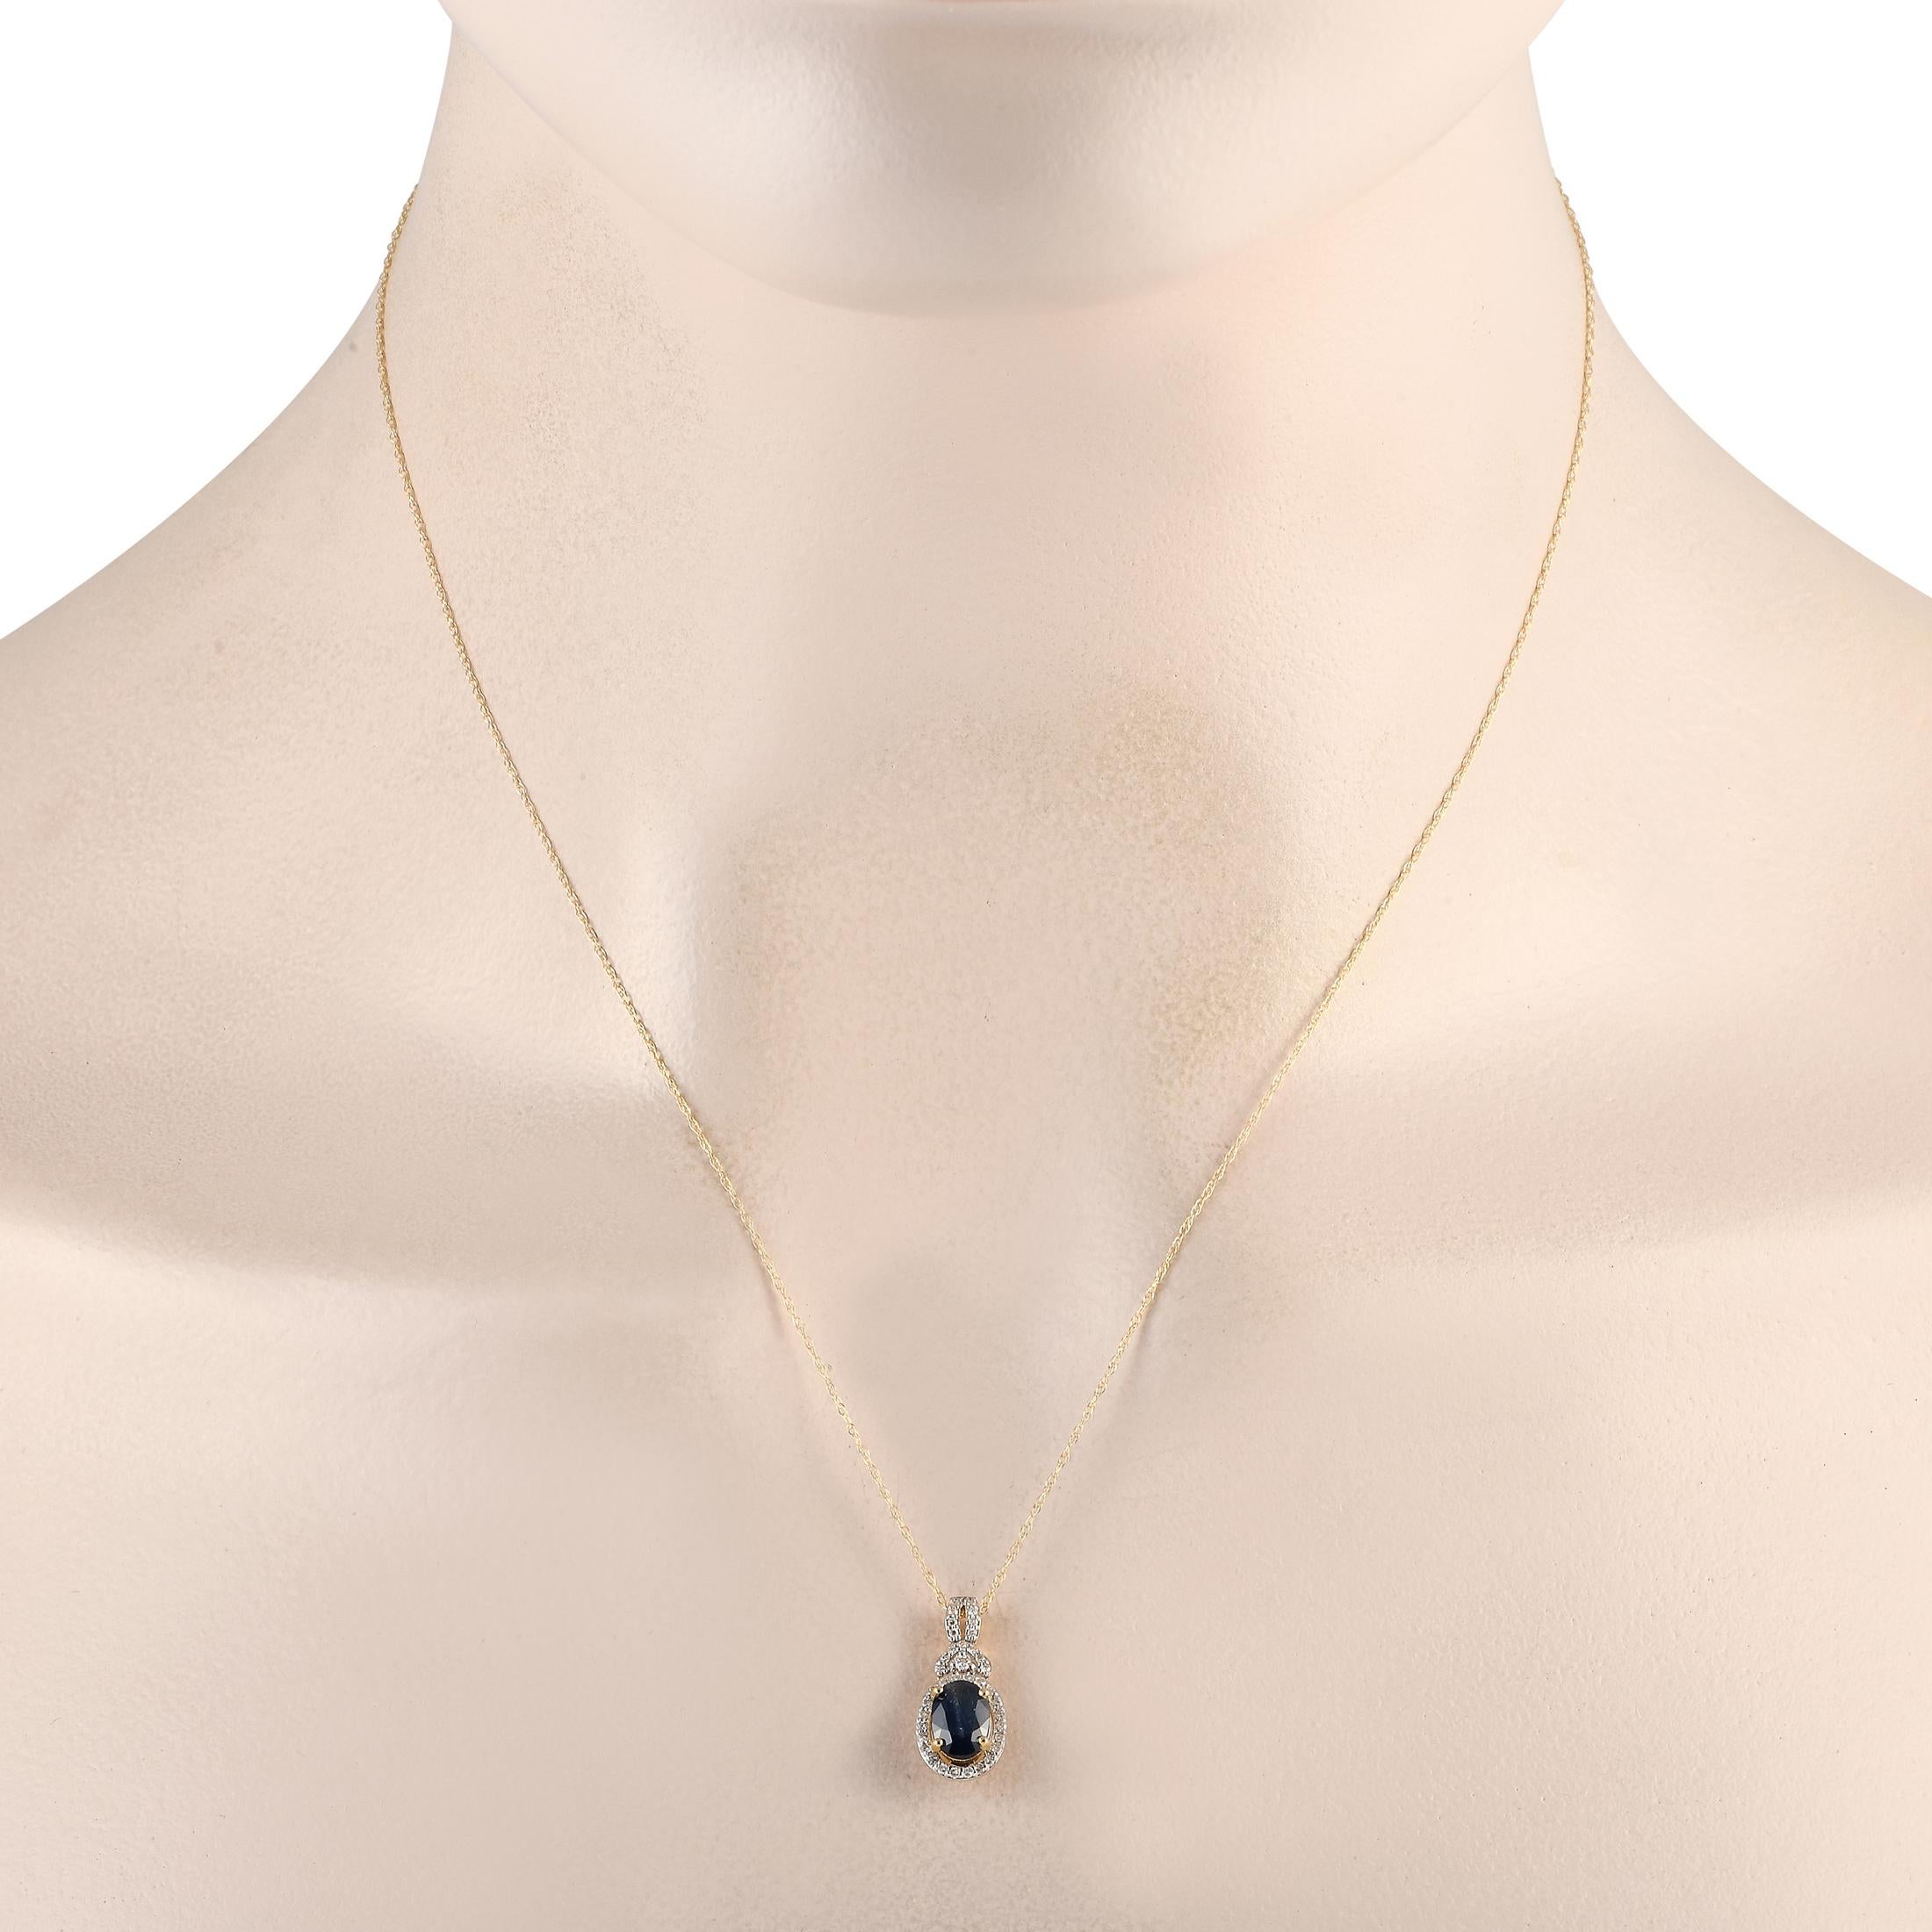 An excellent choice for special occasions that require something more sophisticated. This LB Exclusive necklace has a 14K yellow gold chain and a 0.75 by 0.35 pendant. The stylized bail is decorated with diamonds, matching the oval frame that